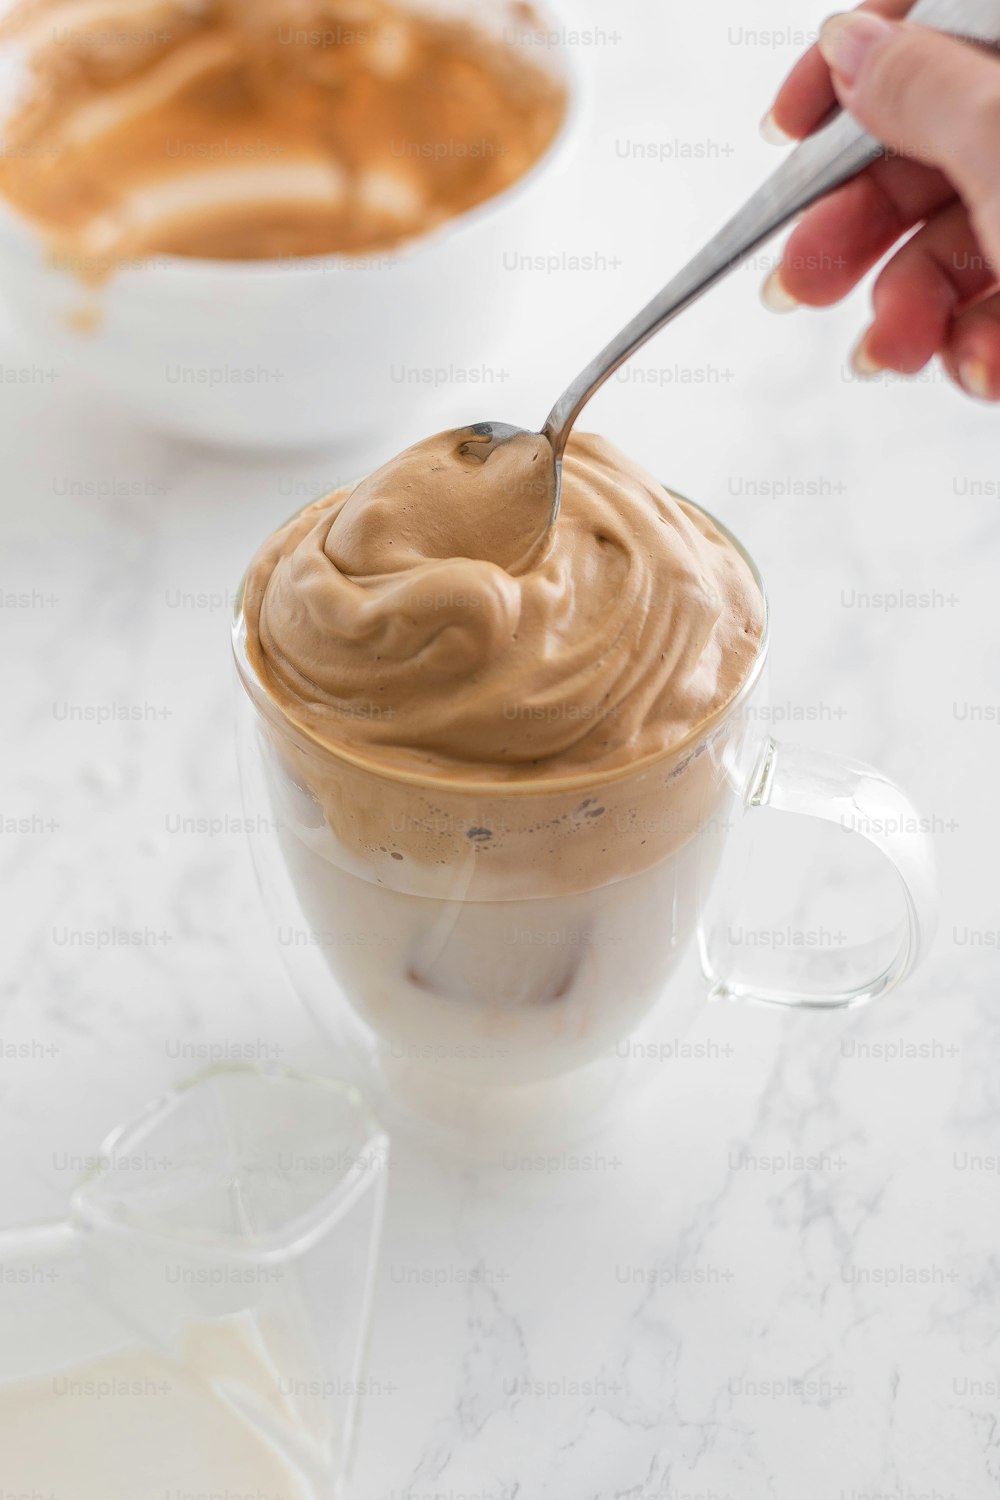 a hand holding a spoon over a cup of peanut butter